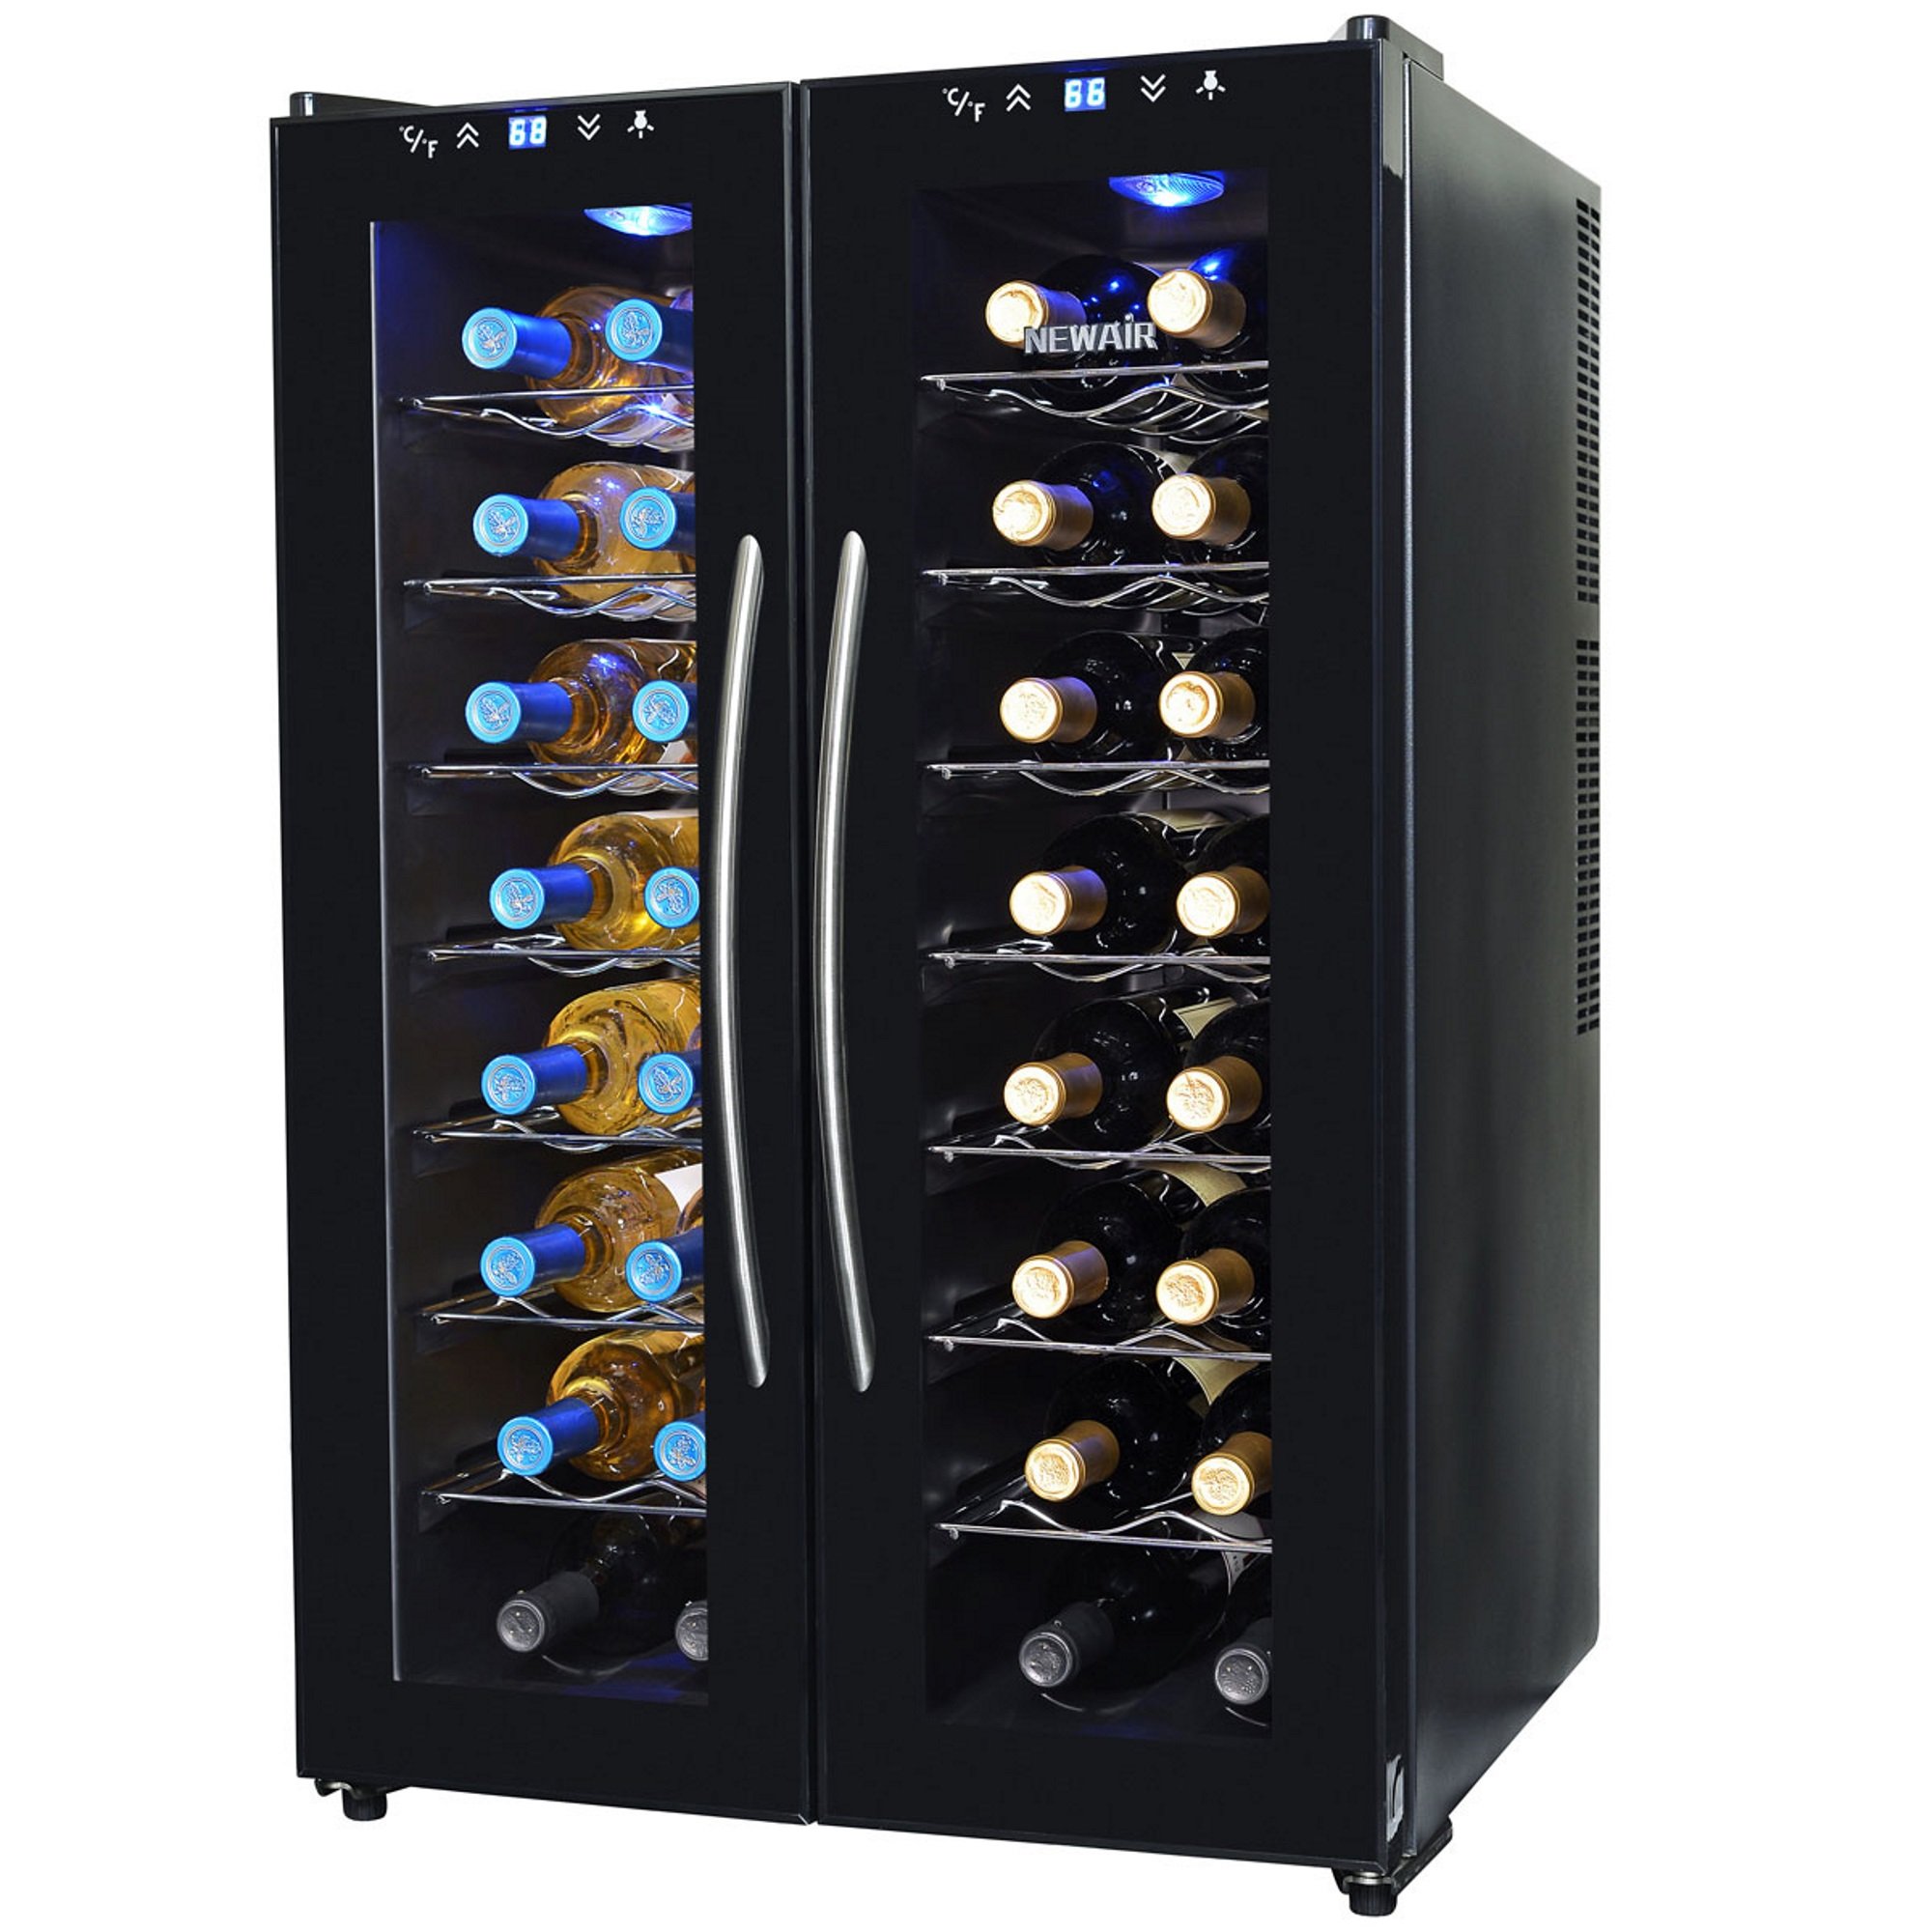 NewAir Silent Wine Cooler 32 Bottle Capacity Dual Zone Refrigerator, AW ...